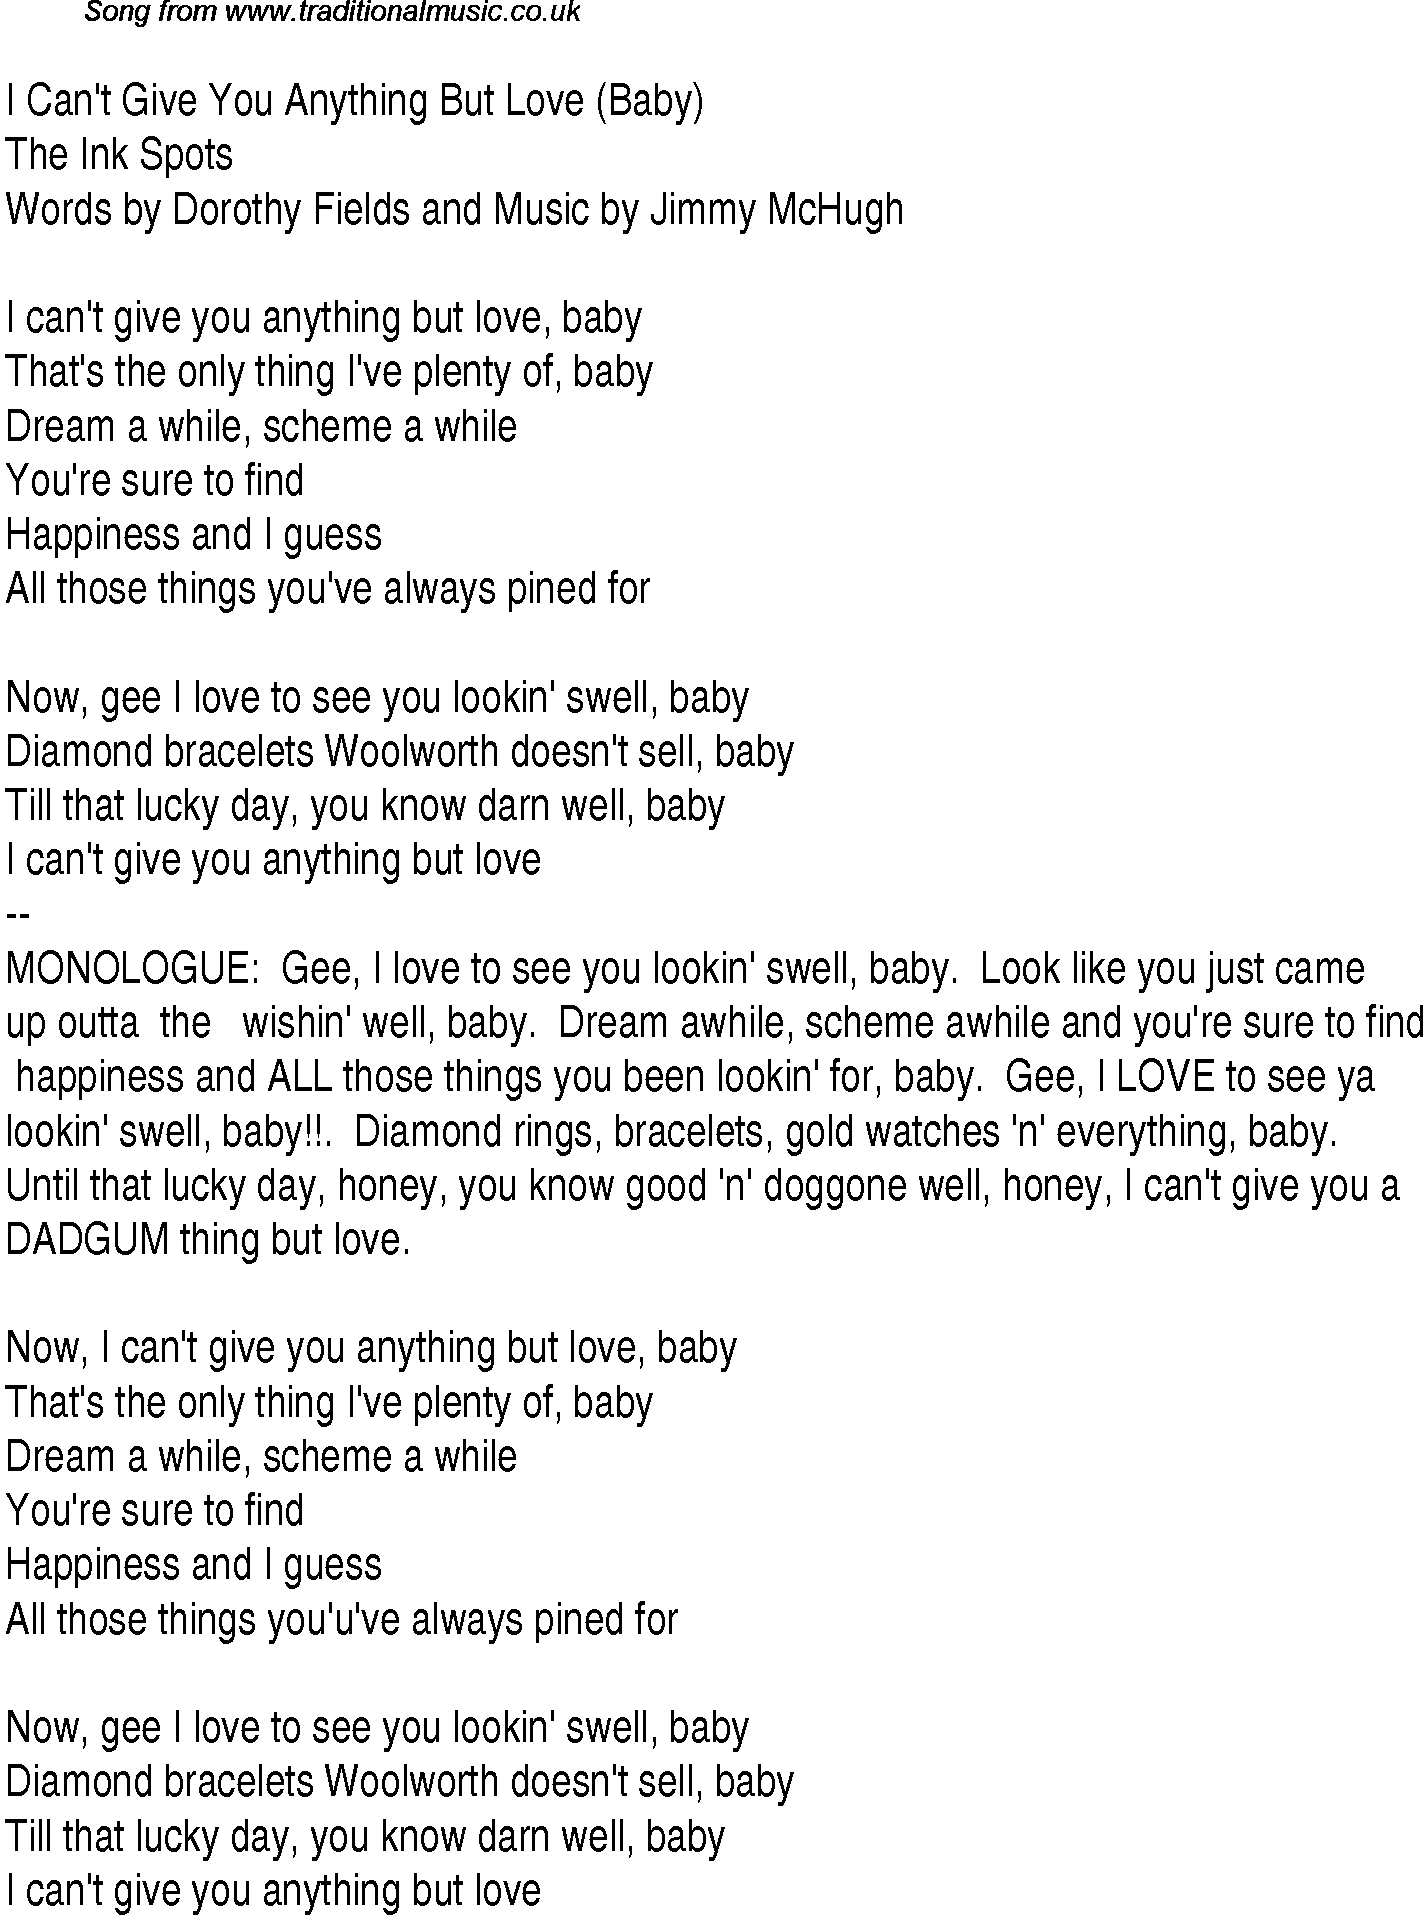 Baby girl текст песни. I Love you Baby текст. Текст песни i Love you Baby. Perfect слова песни. Like a Love Song Baby текст.